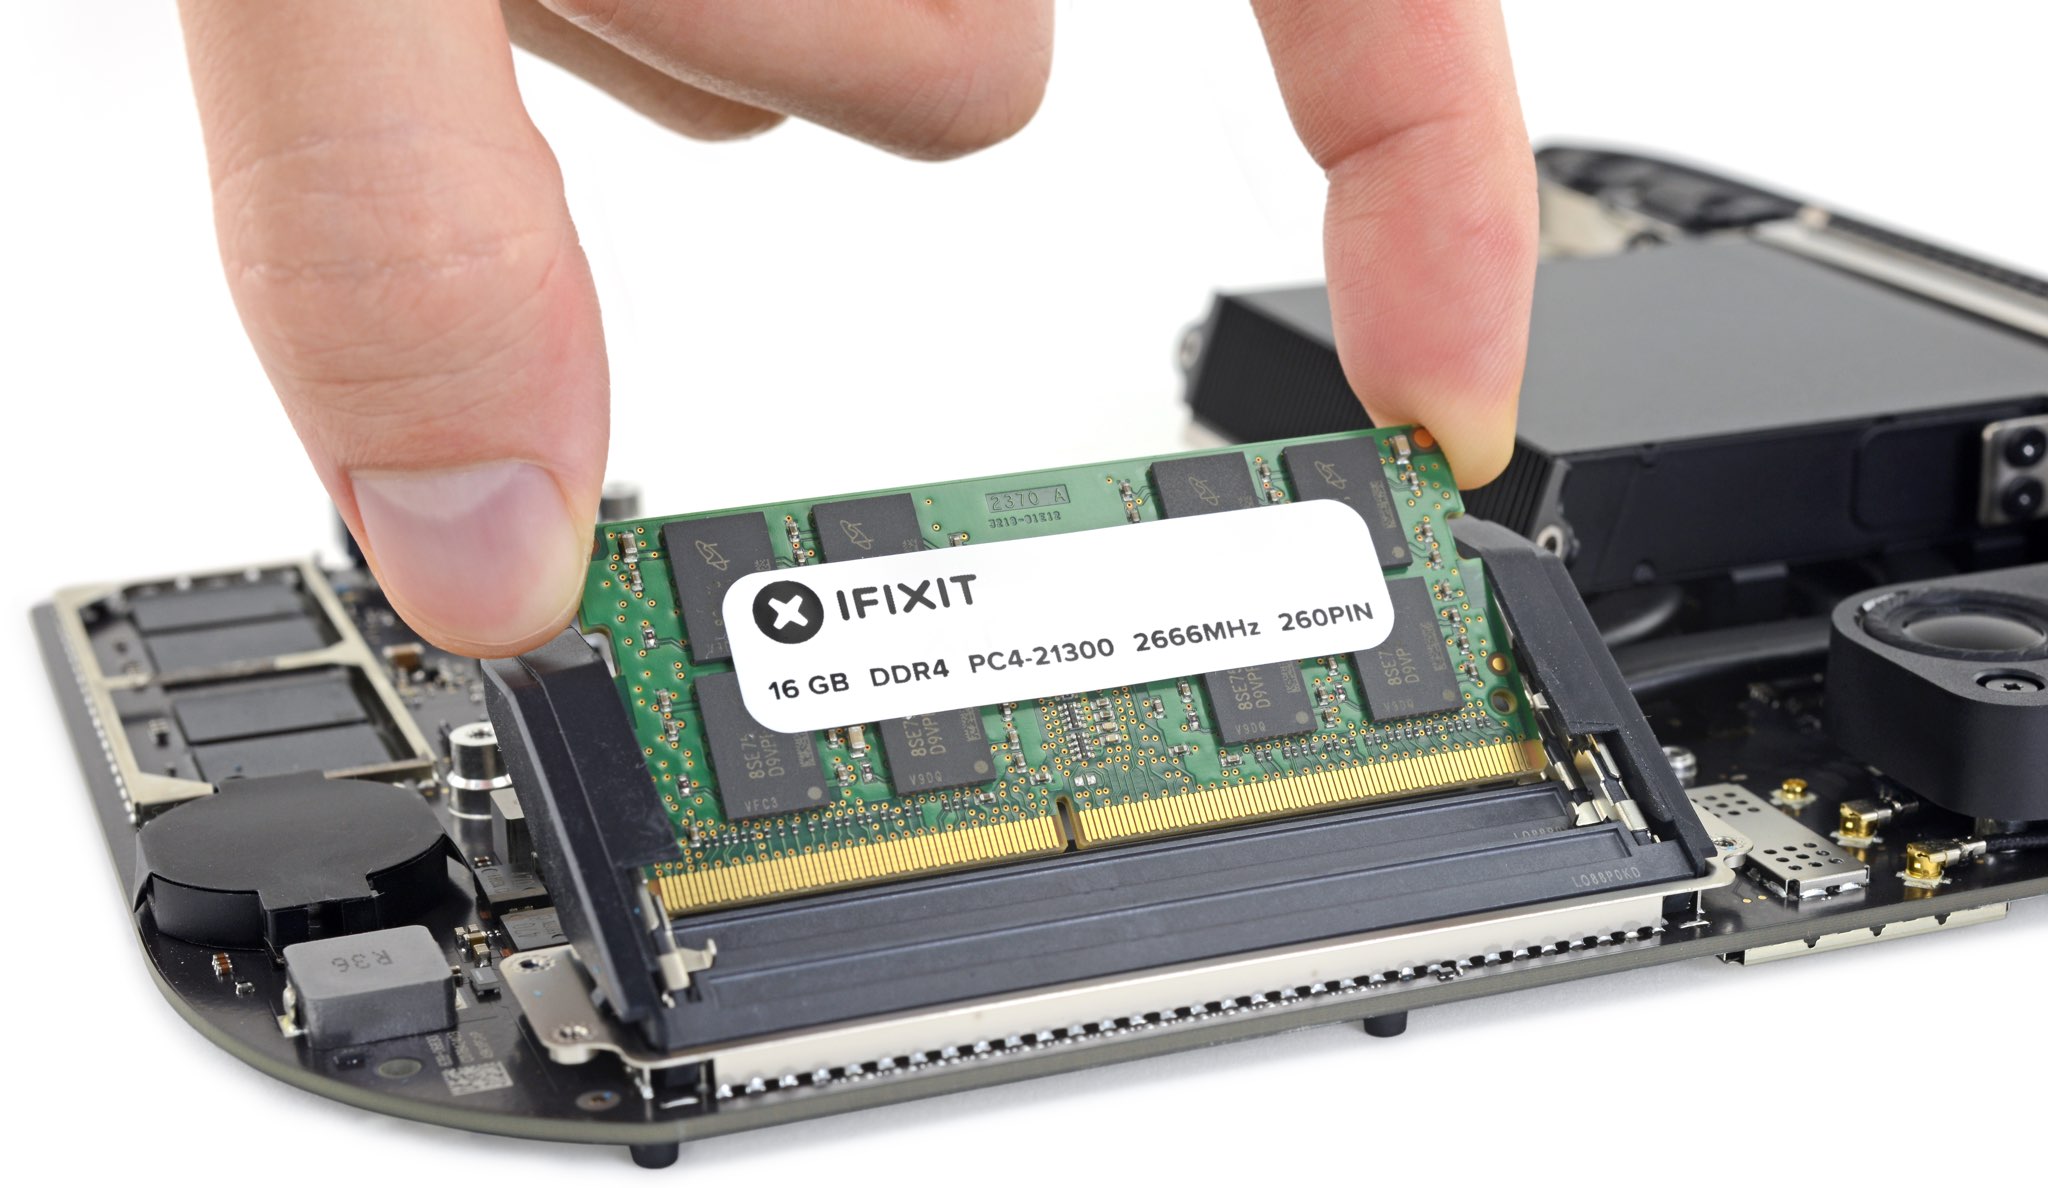 gennembore olie taske Save hundreds of dollars by upgrading RAM in your 2018 Mac mini with  iFixit's DIY kit